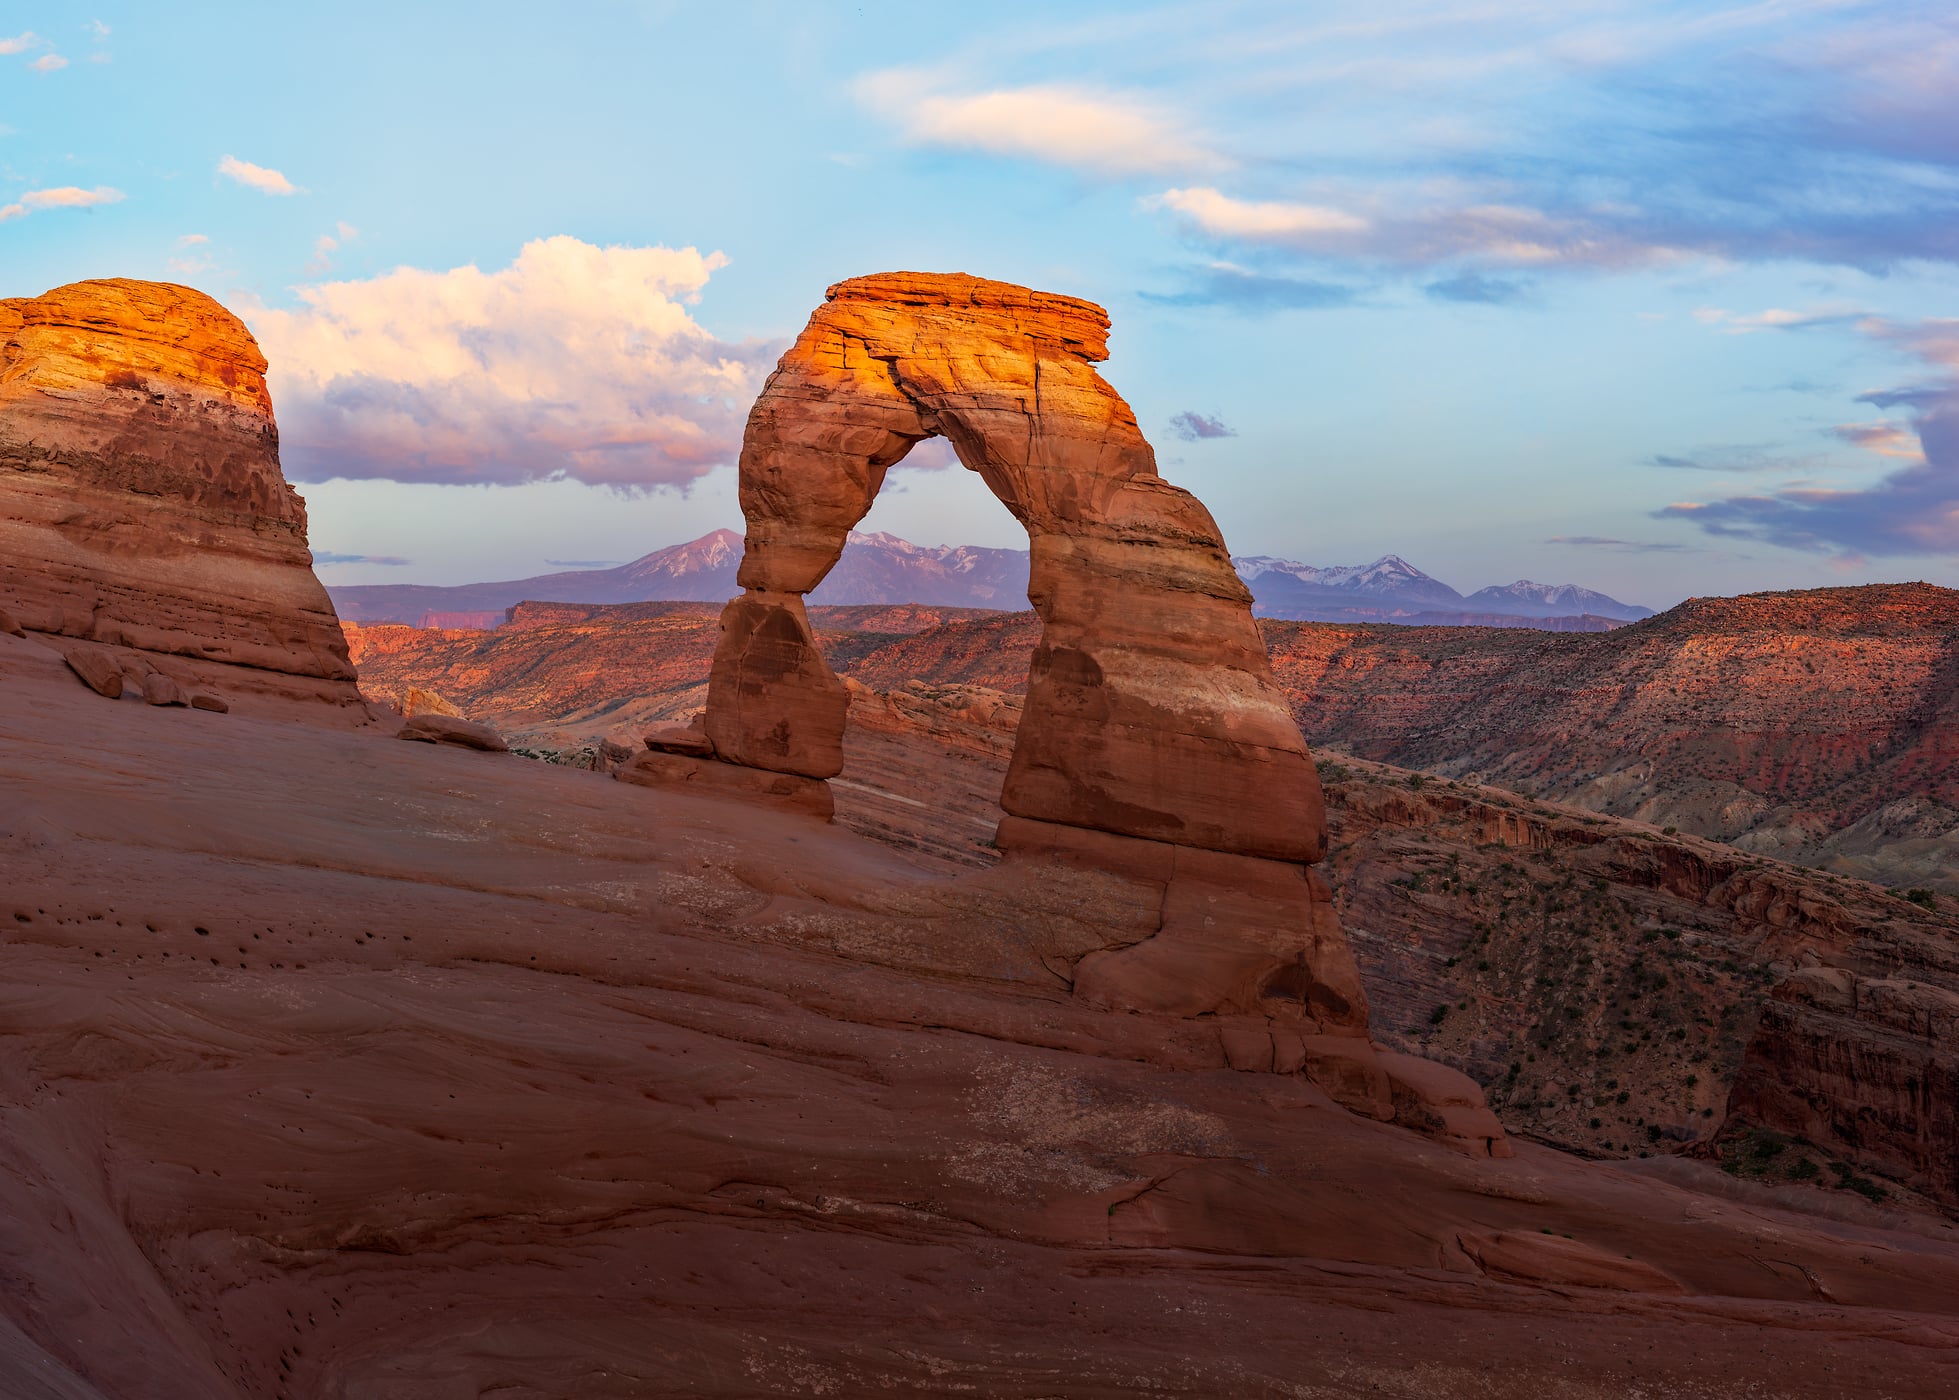 966 megapixels! A very high resolution, large-format VAST photo print of the Delicate Arch rock formation at sunset; landscape photograph created by John Freeman in Delicate Arch, Arches National Park, Utah.